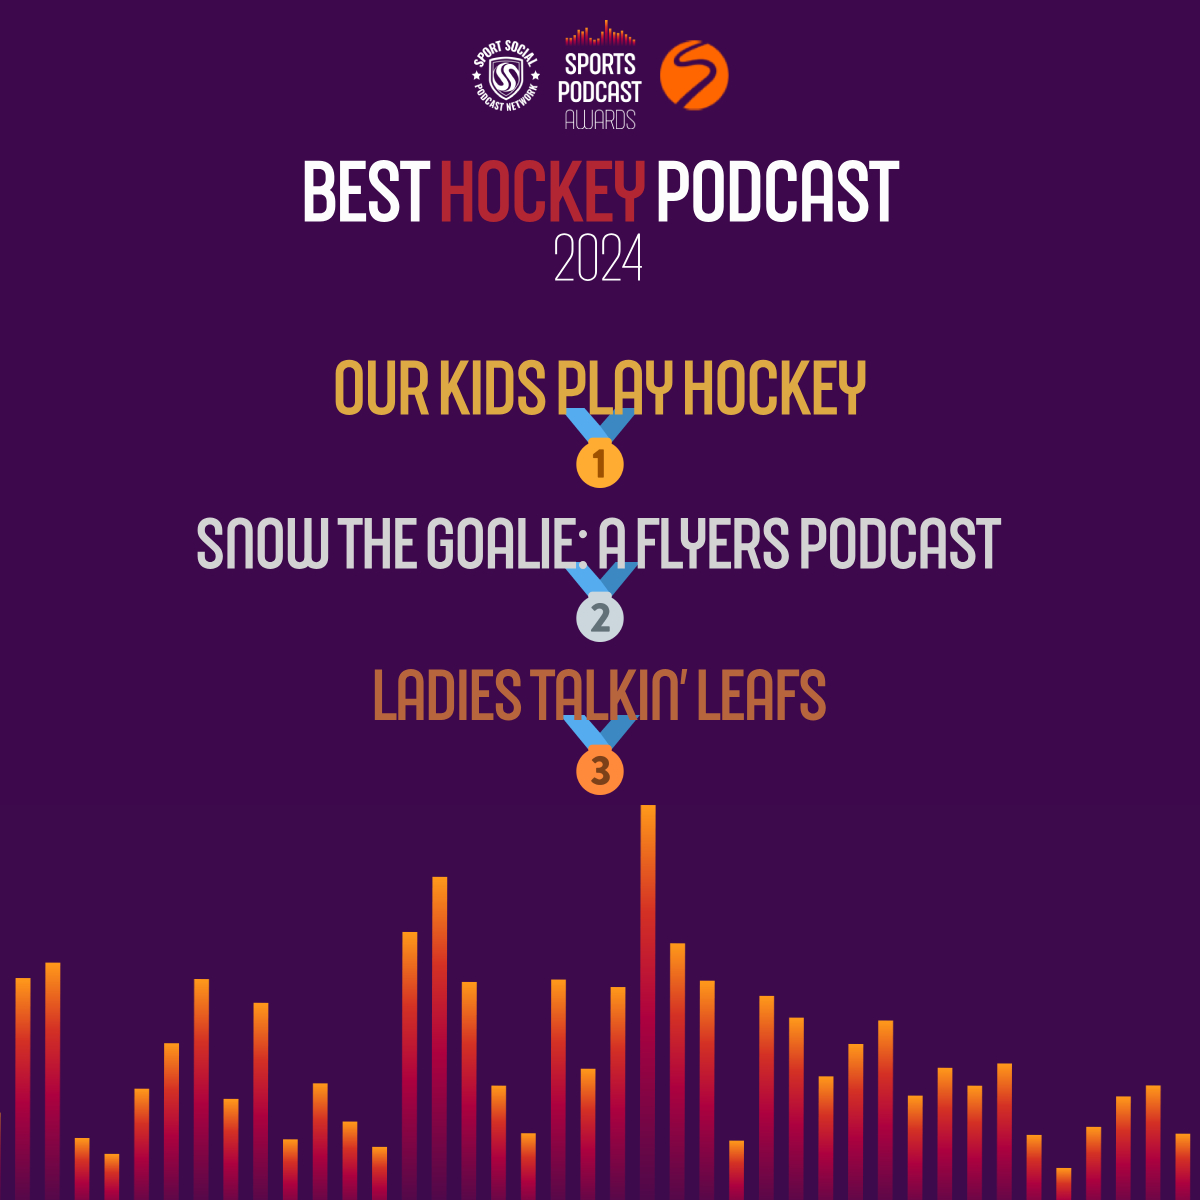 🏆🏒 All your winners of the Best Hockey Podcast awards together are… 🥇 Our Kids Play Hockey @OKPHpodcast 🥈 Snow The Goalie: A Flyers Podcast @SnowTheGoalie 🥉 Ladies Talkin' Leafs @LTL1917 👏